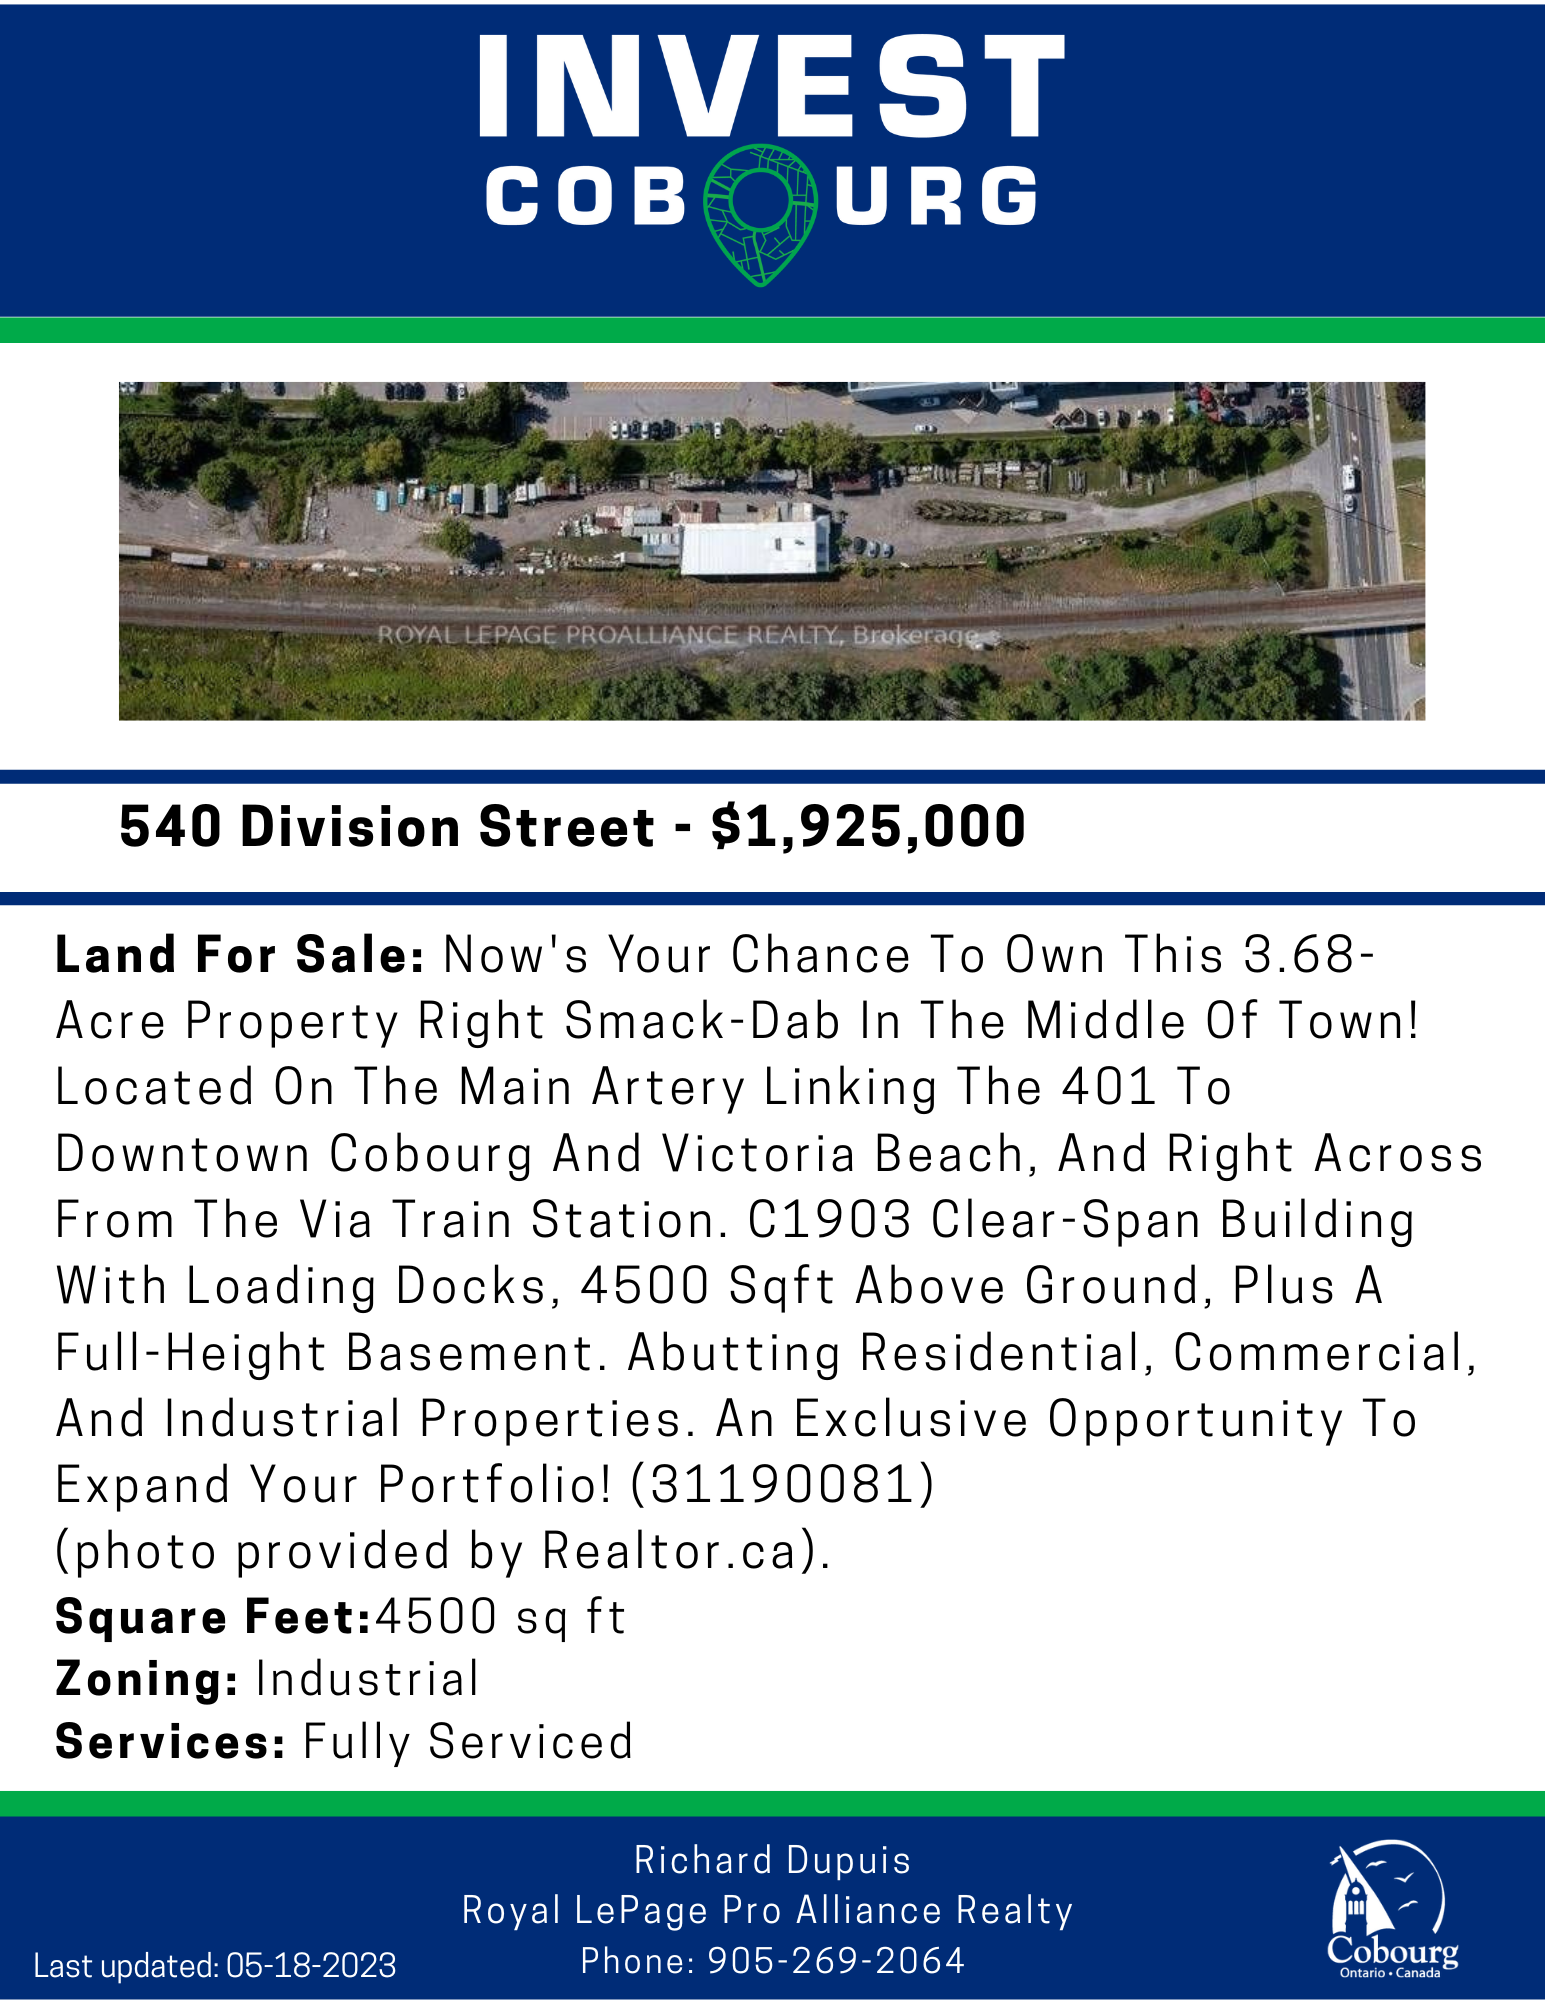 Sell sheet for 540 Division Street